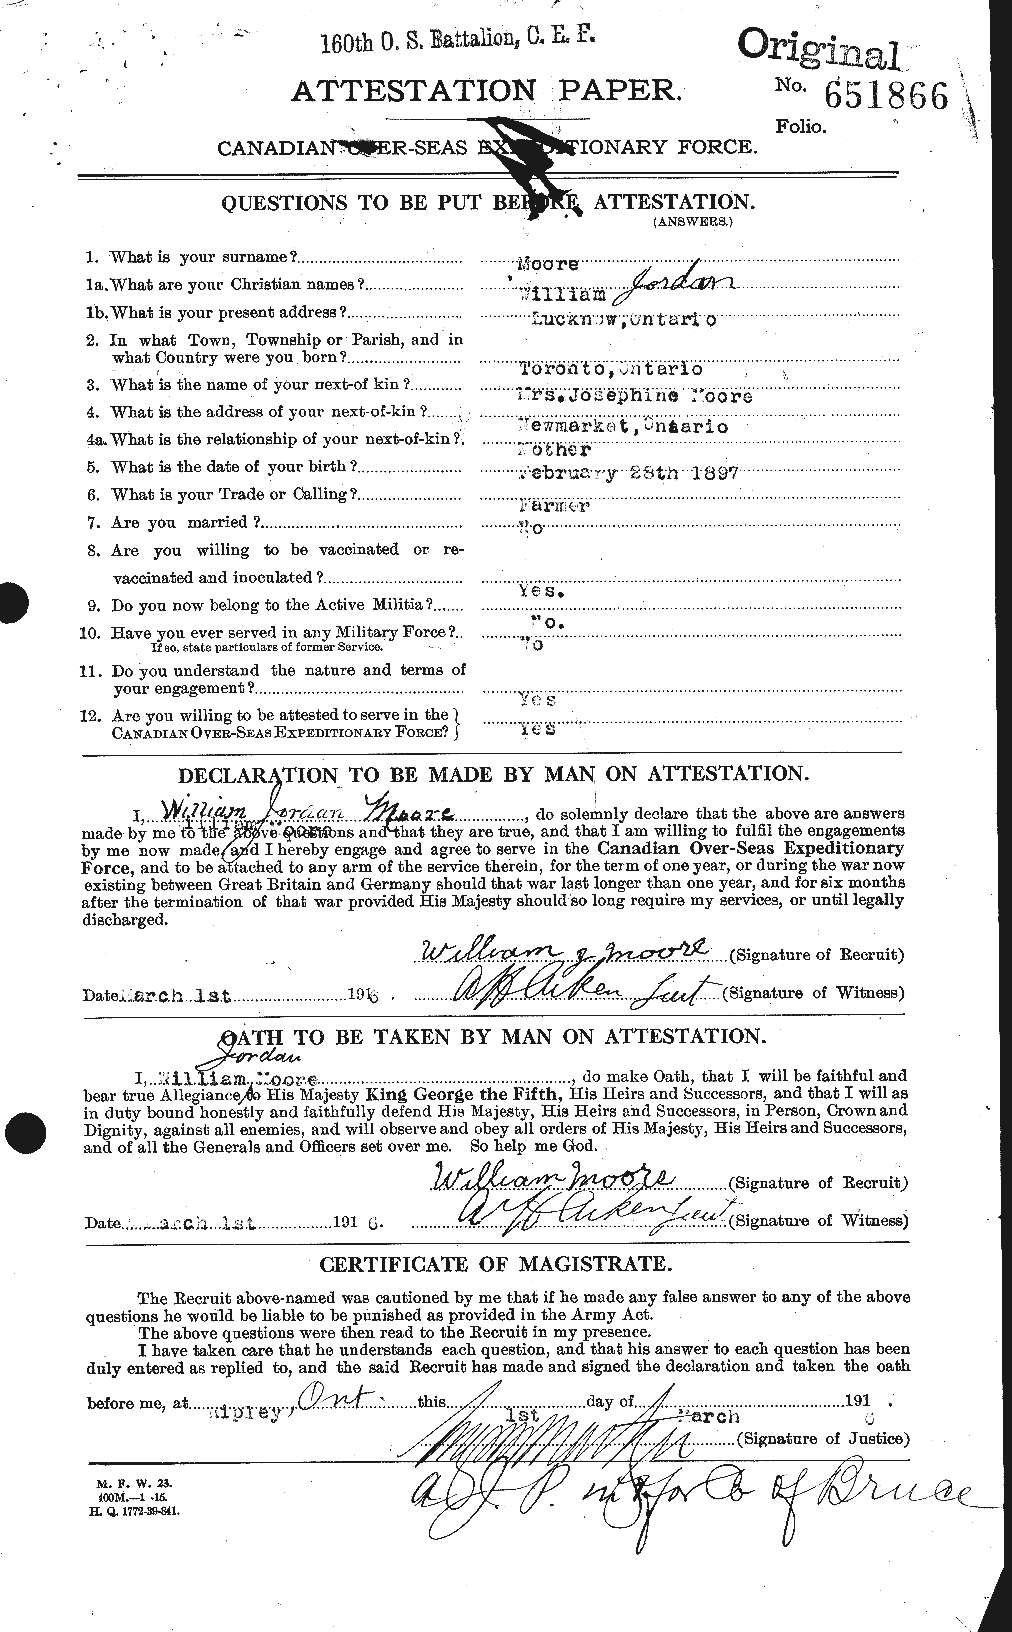 Personnel Records of the First World War - CEF 505850a